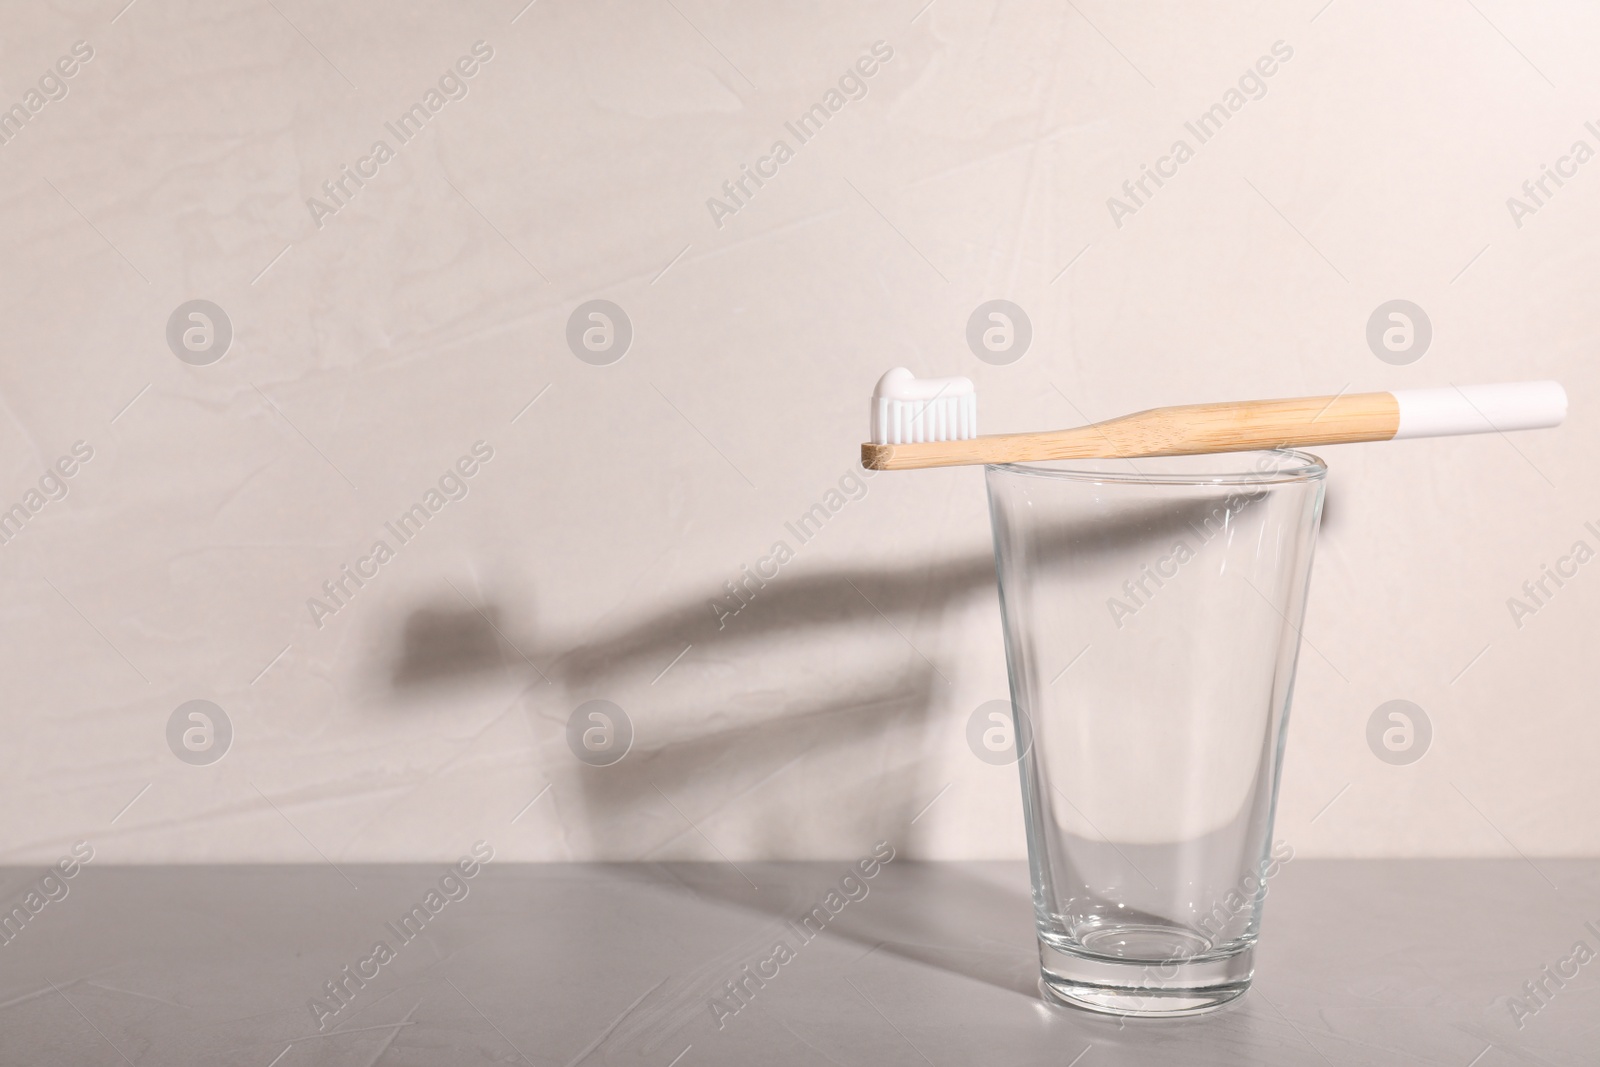 Photo of Glass with bamboo toothbrush on table against grey background. Space for text